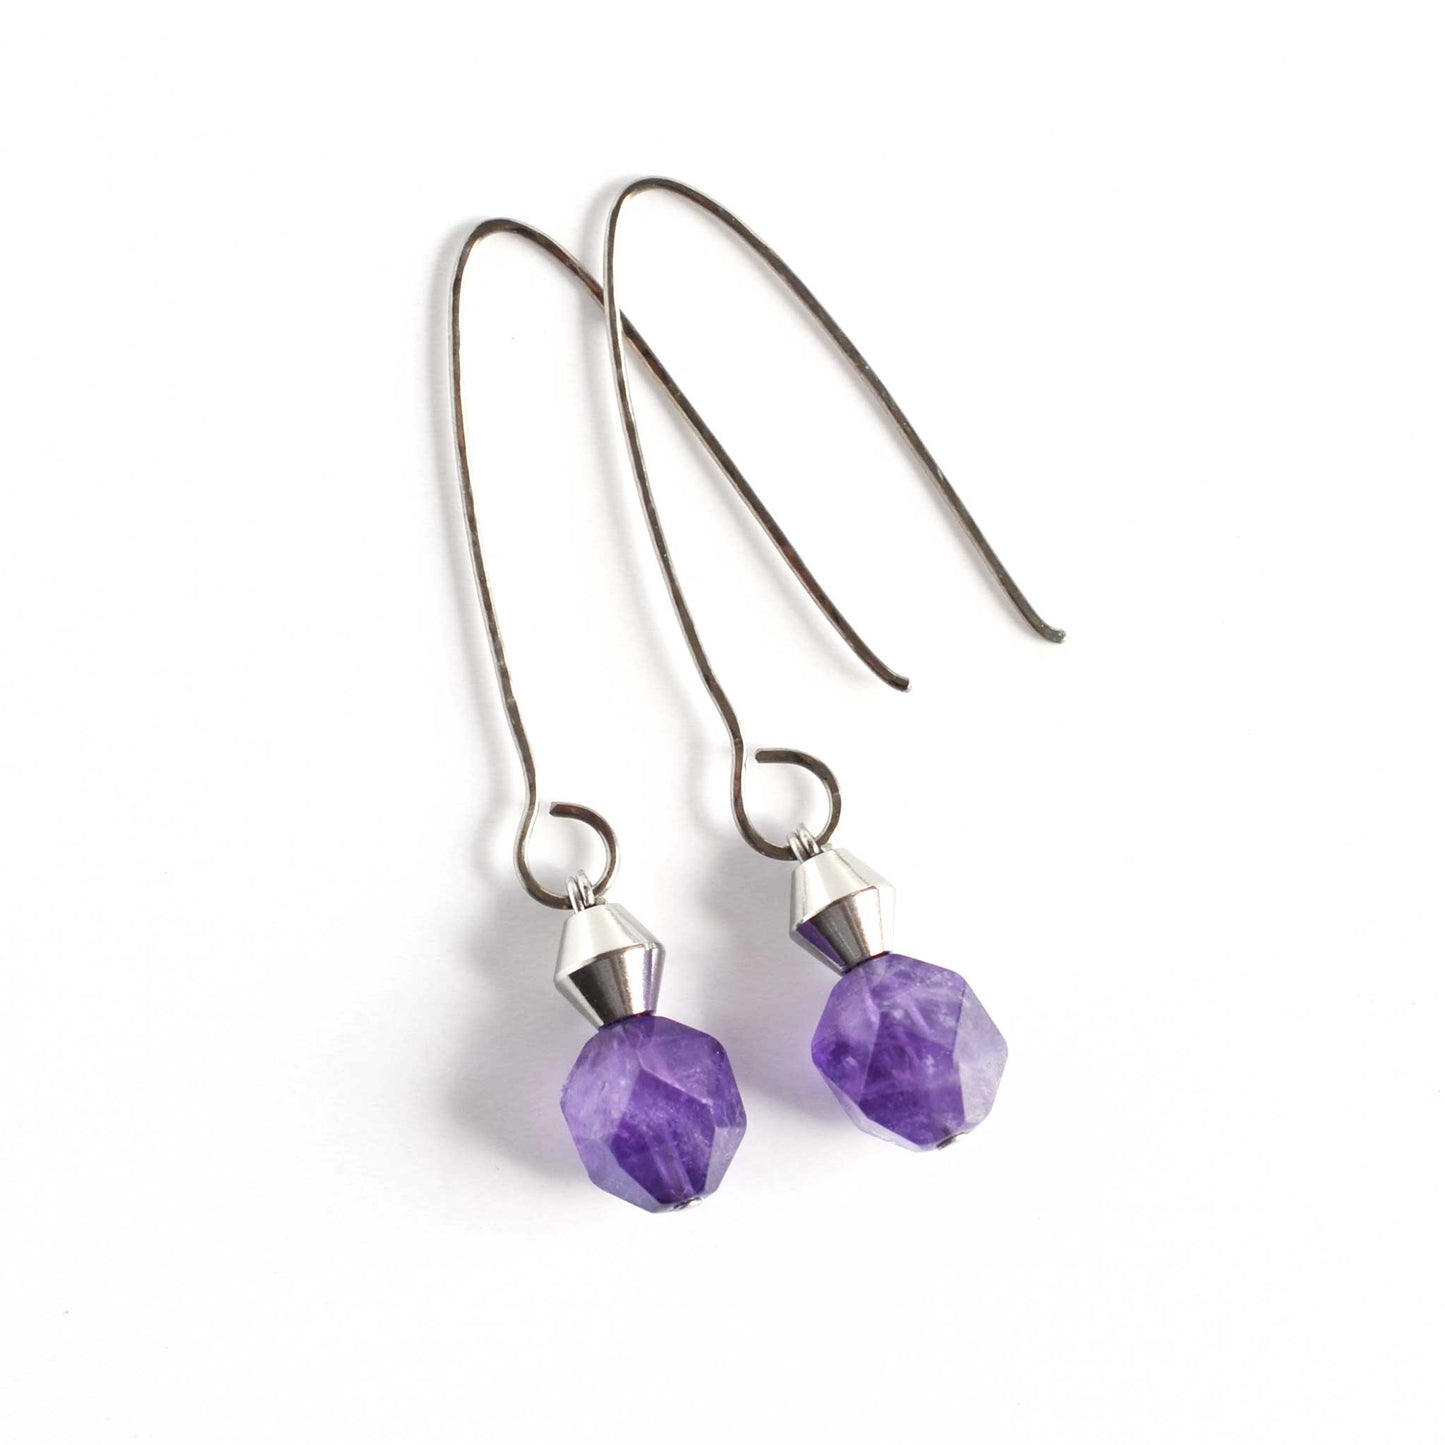 Long Amethyst & Titanium drop earrings laying on white background.